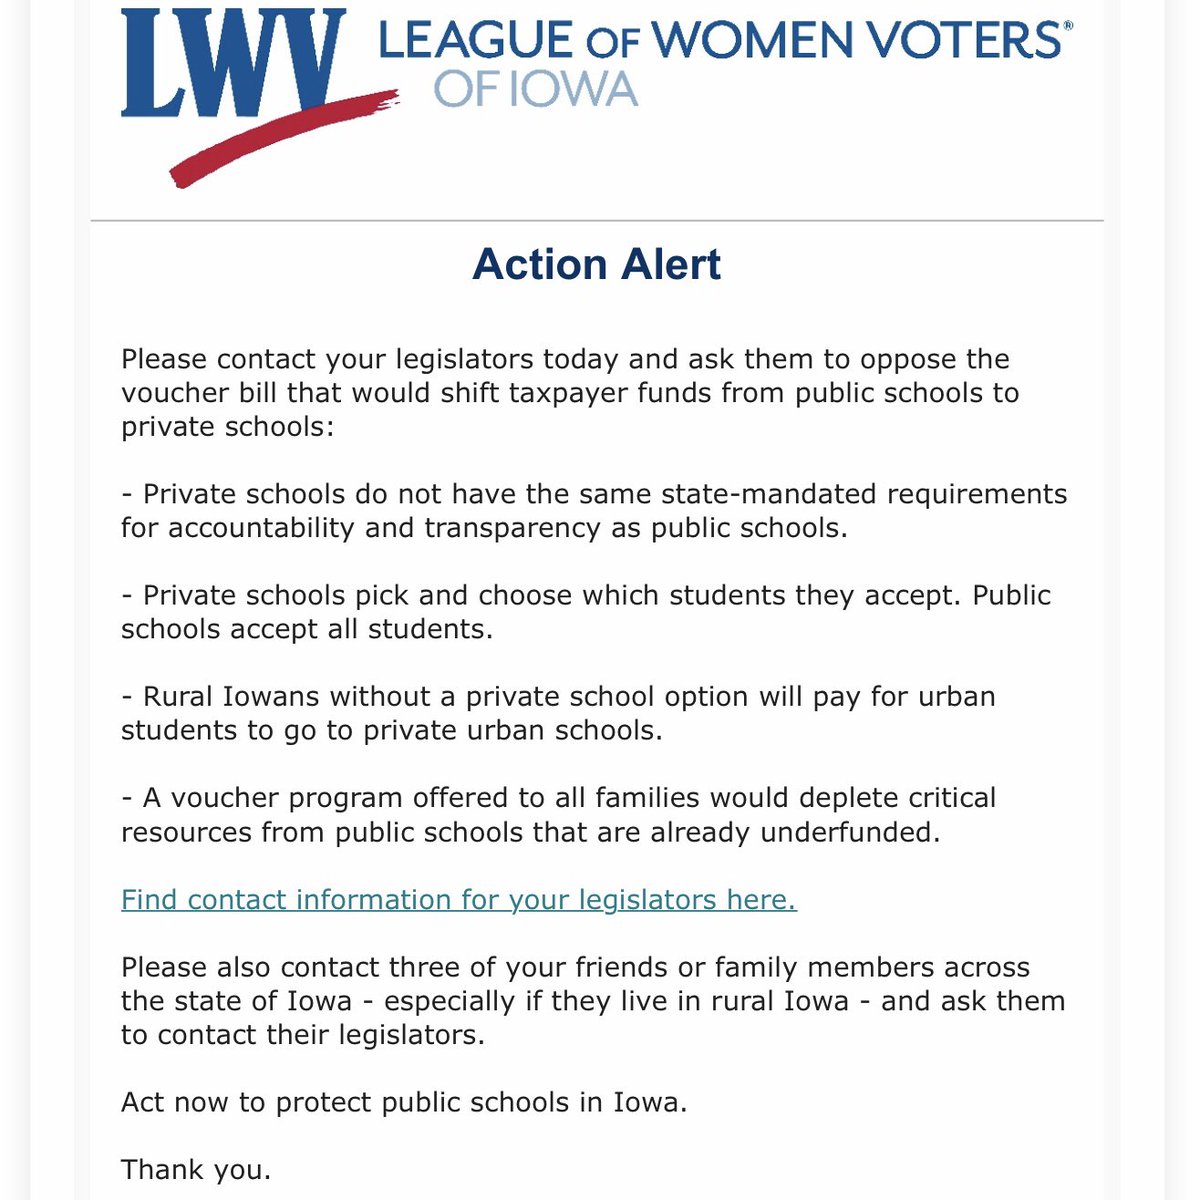 Action Alert: No Vouchers. Please contact your legislators today and ask friends and family members across Iowa to do the same. Find contact information for your legislators here: legis.iowa.gov/legislators #empoweringvoters #defendingdemocracy #lwvia